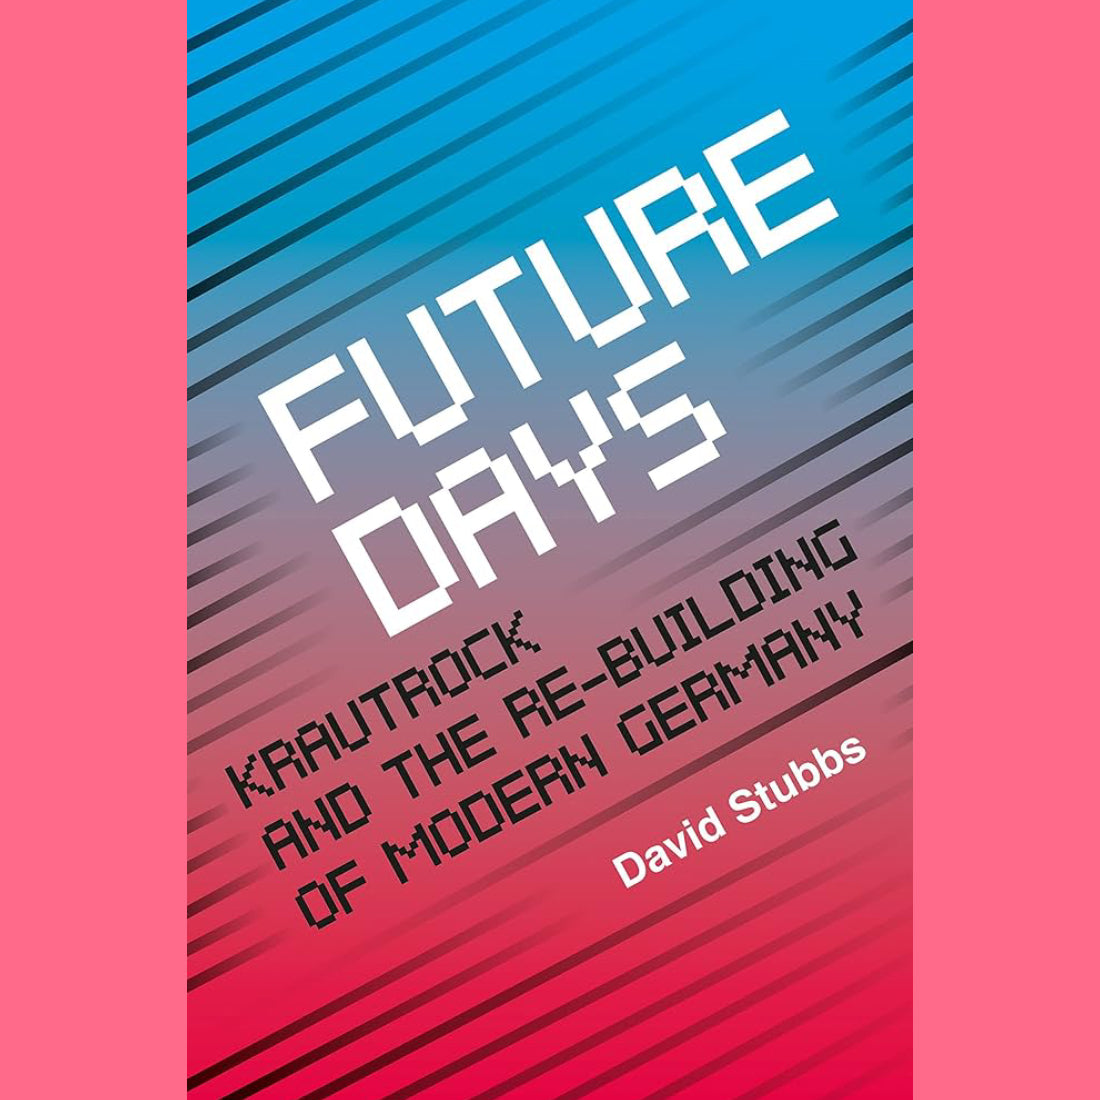 David Stubbs - Future Days | Buy the book from Flying Nun Records